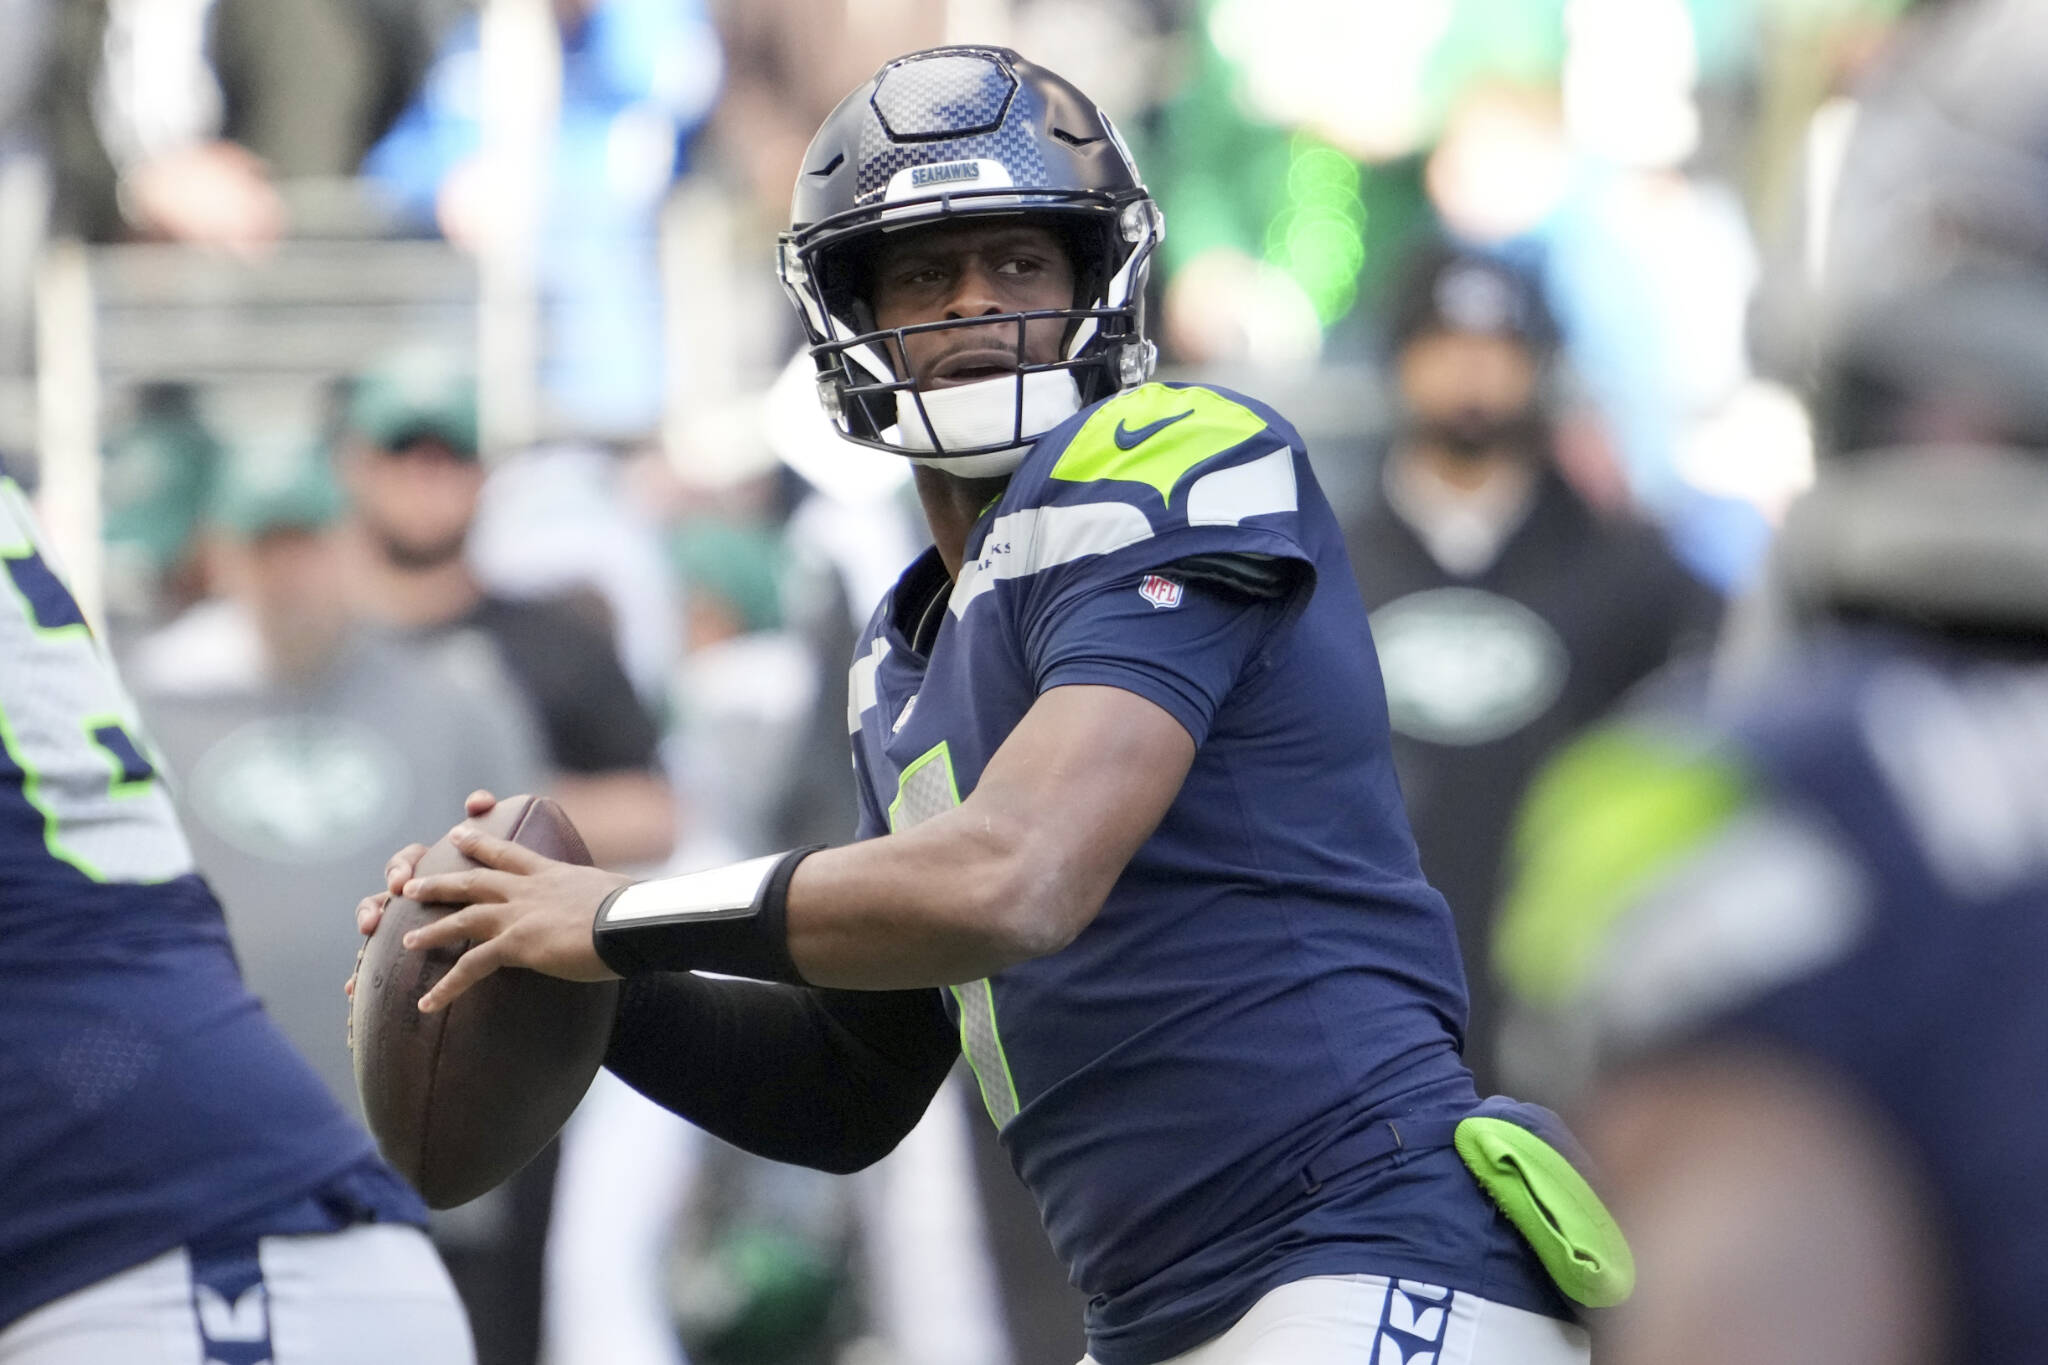 Geno Smith Secures QB1 Spot as Seahawks Embrace New Era Under Mike Macdonald